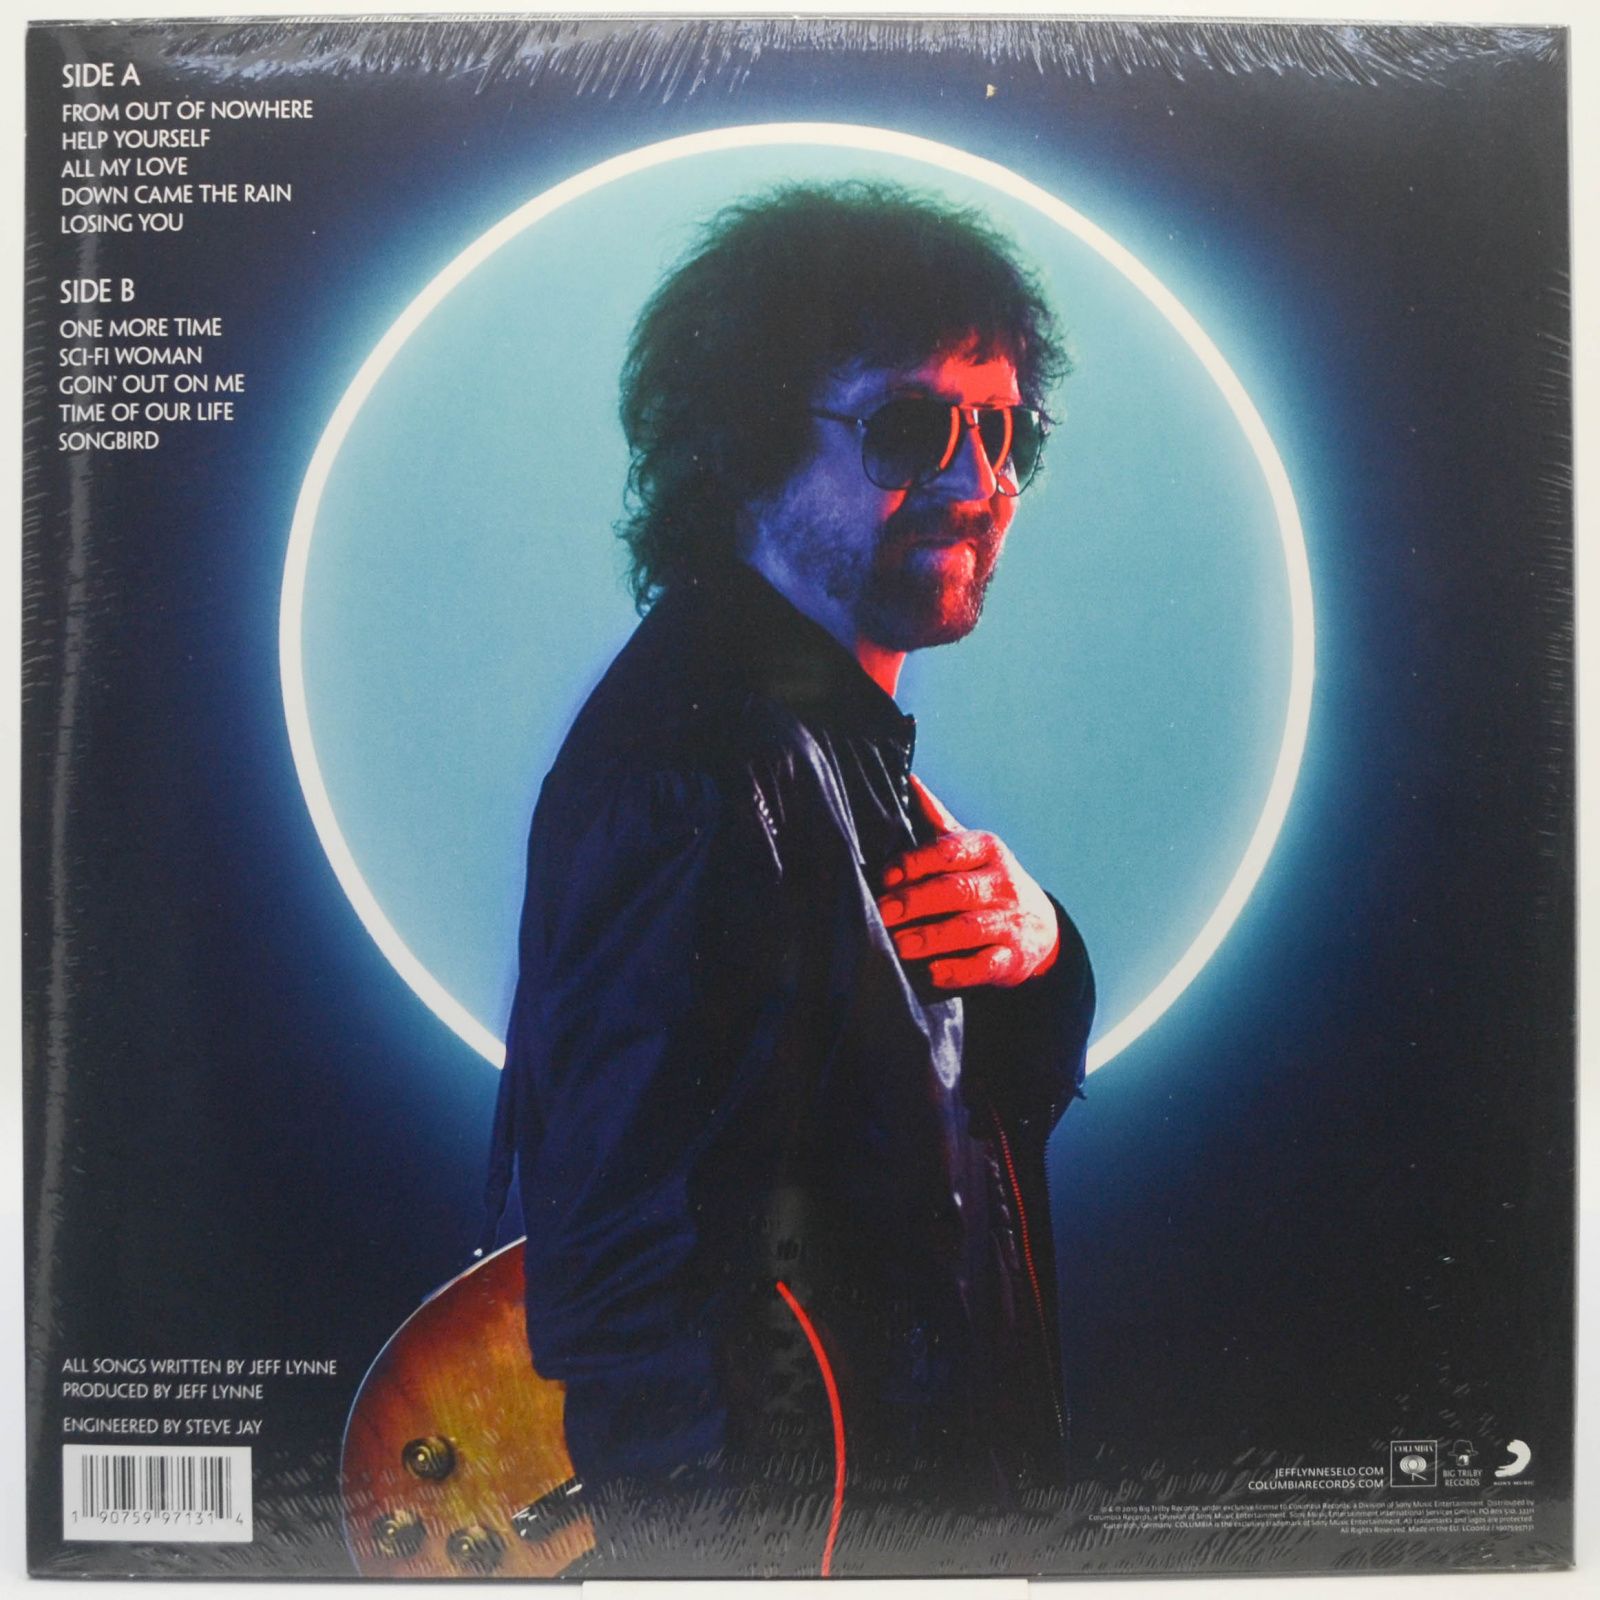 Jeff Lynne's ELO — From Out Of Nowhere, 2019